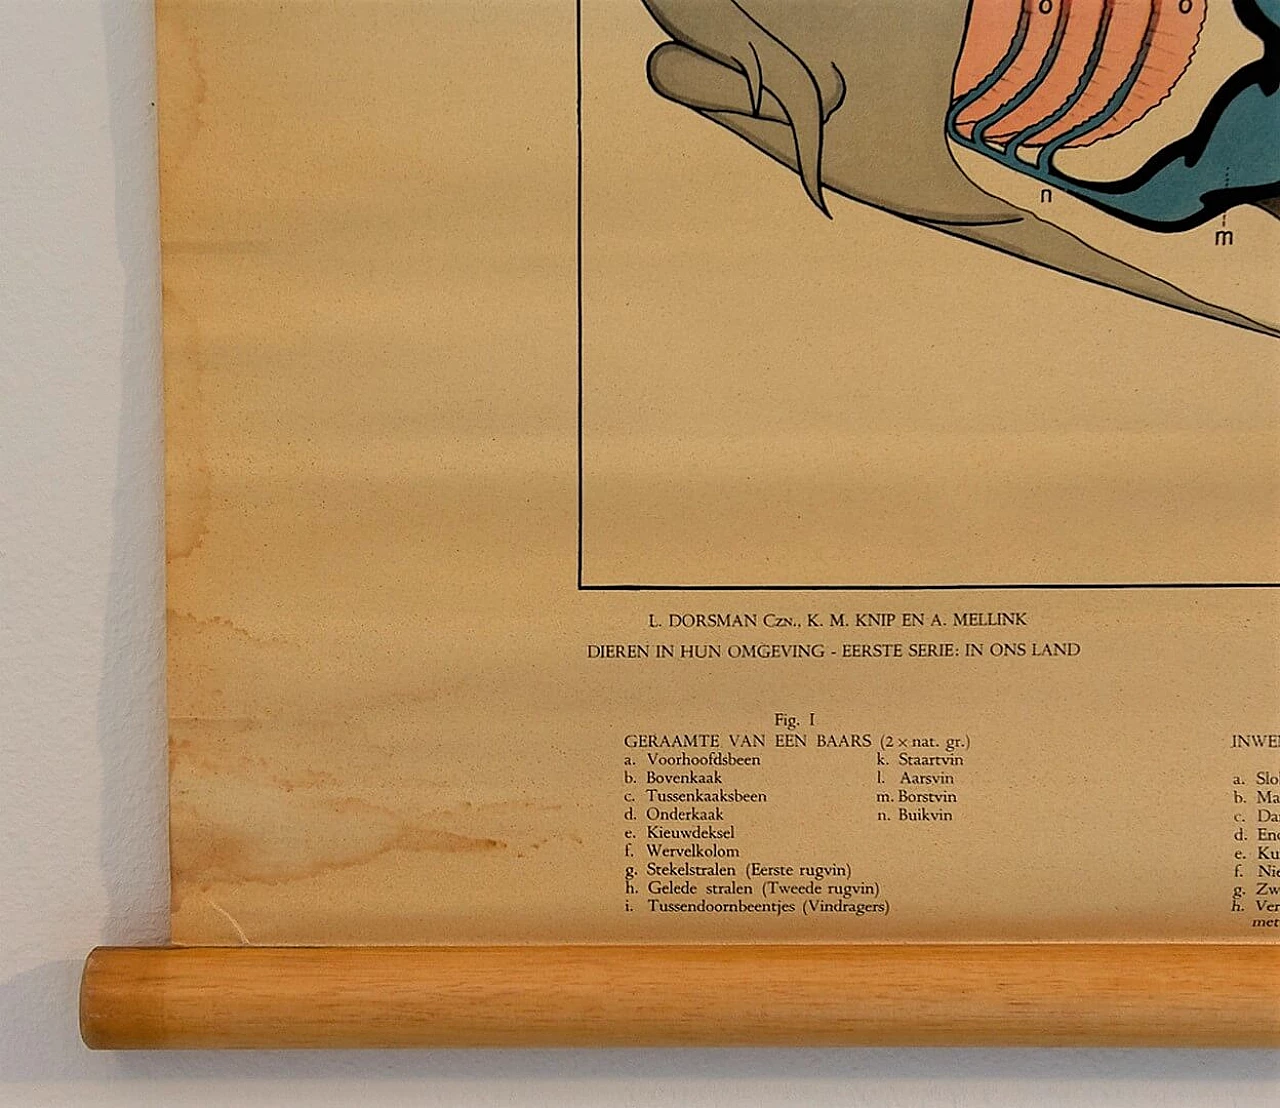 School poster of physiology of a fish, 1960s 1199107